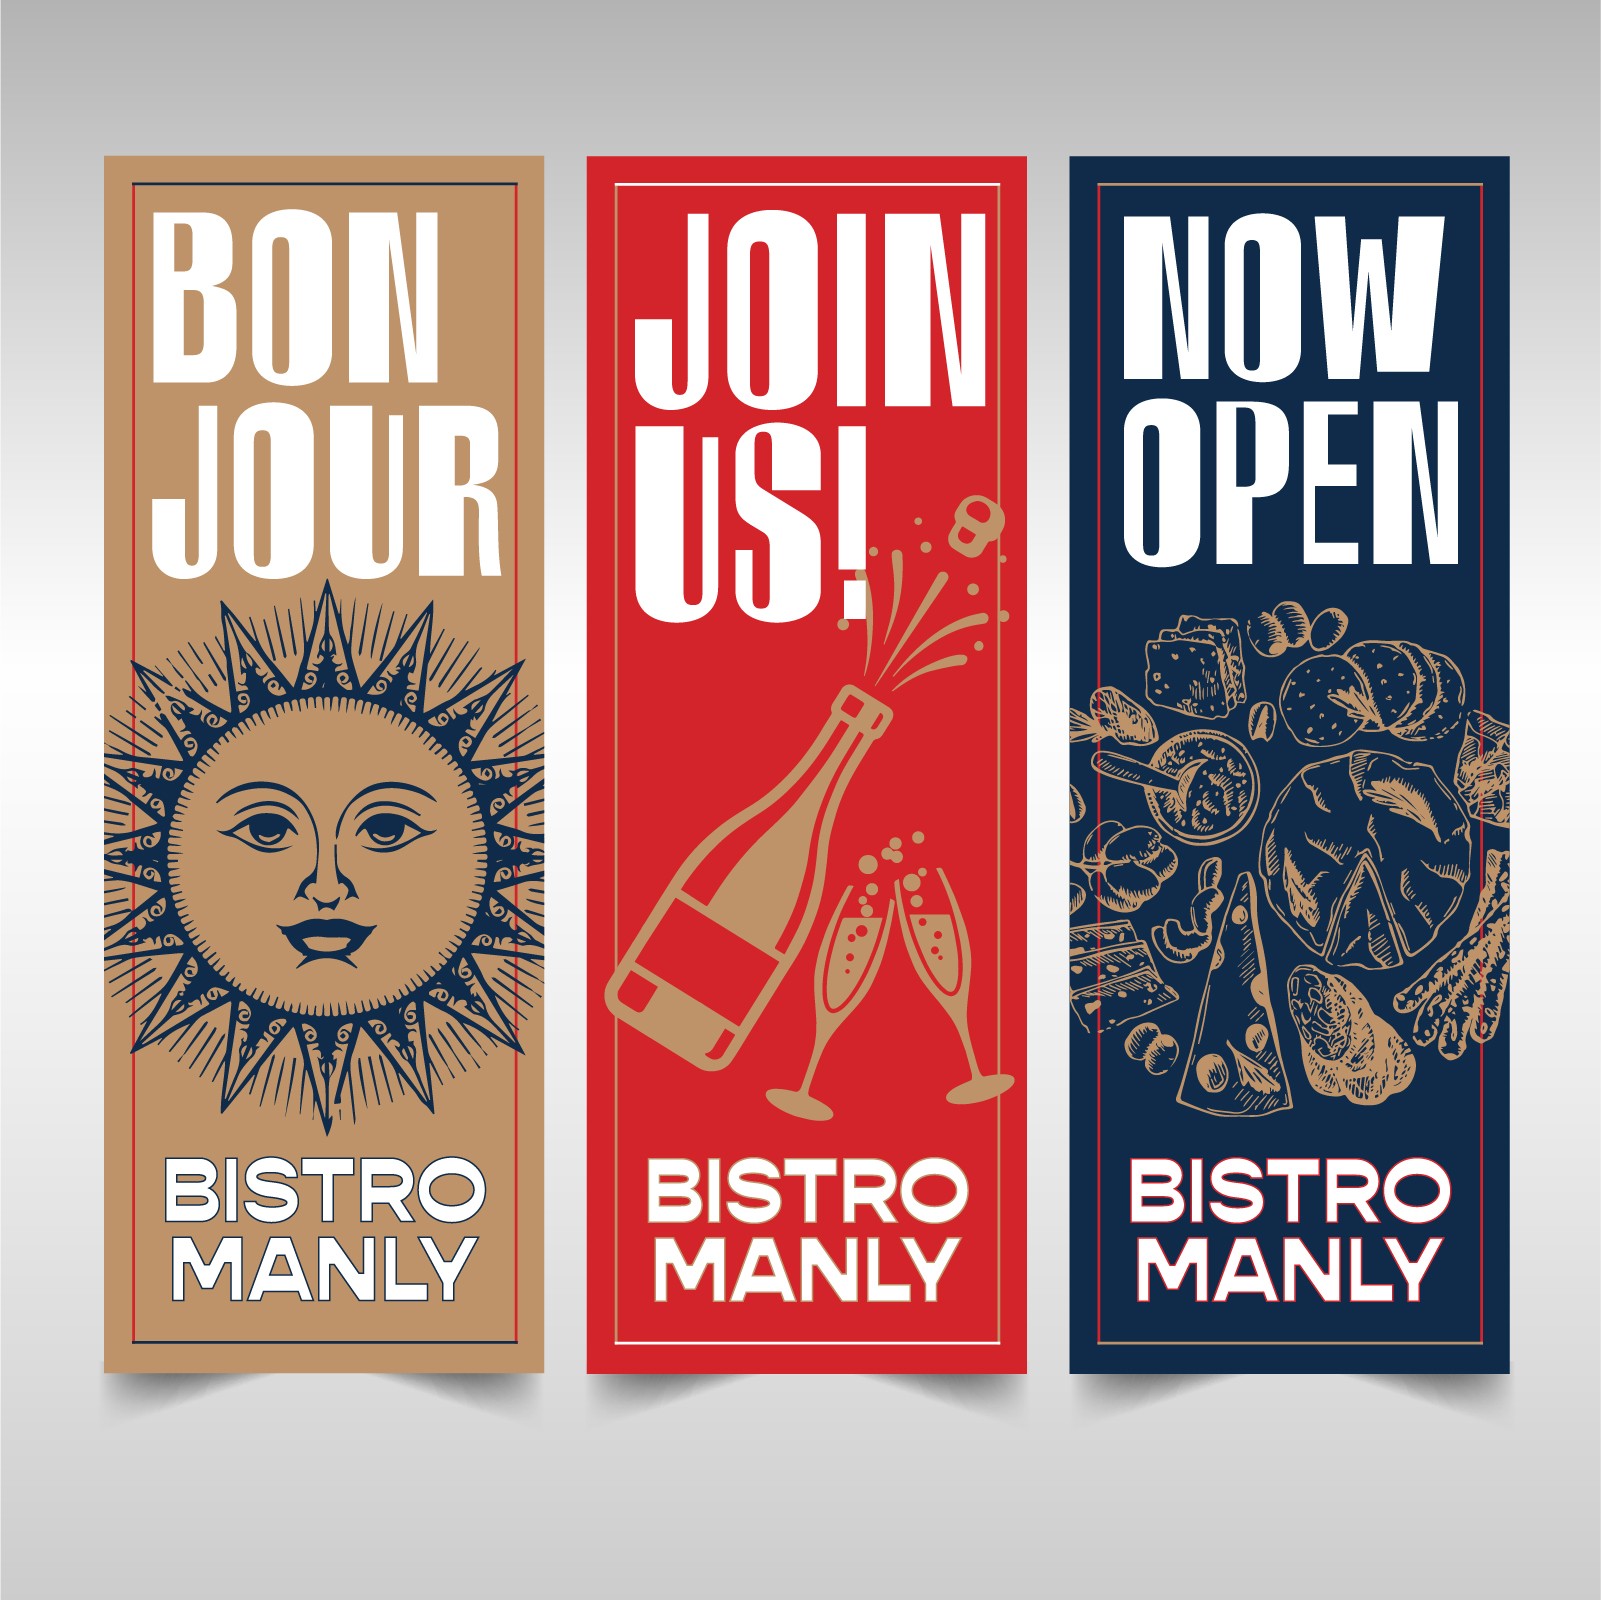 Bistro Manly outdoor banners